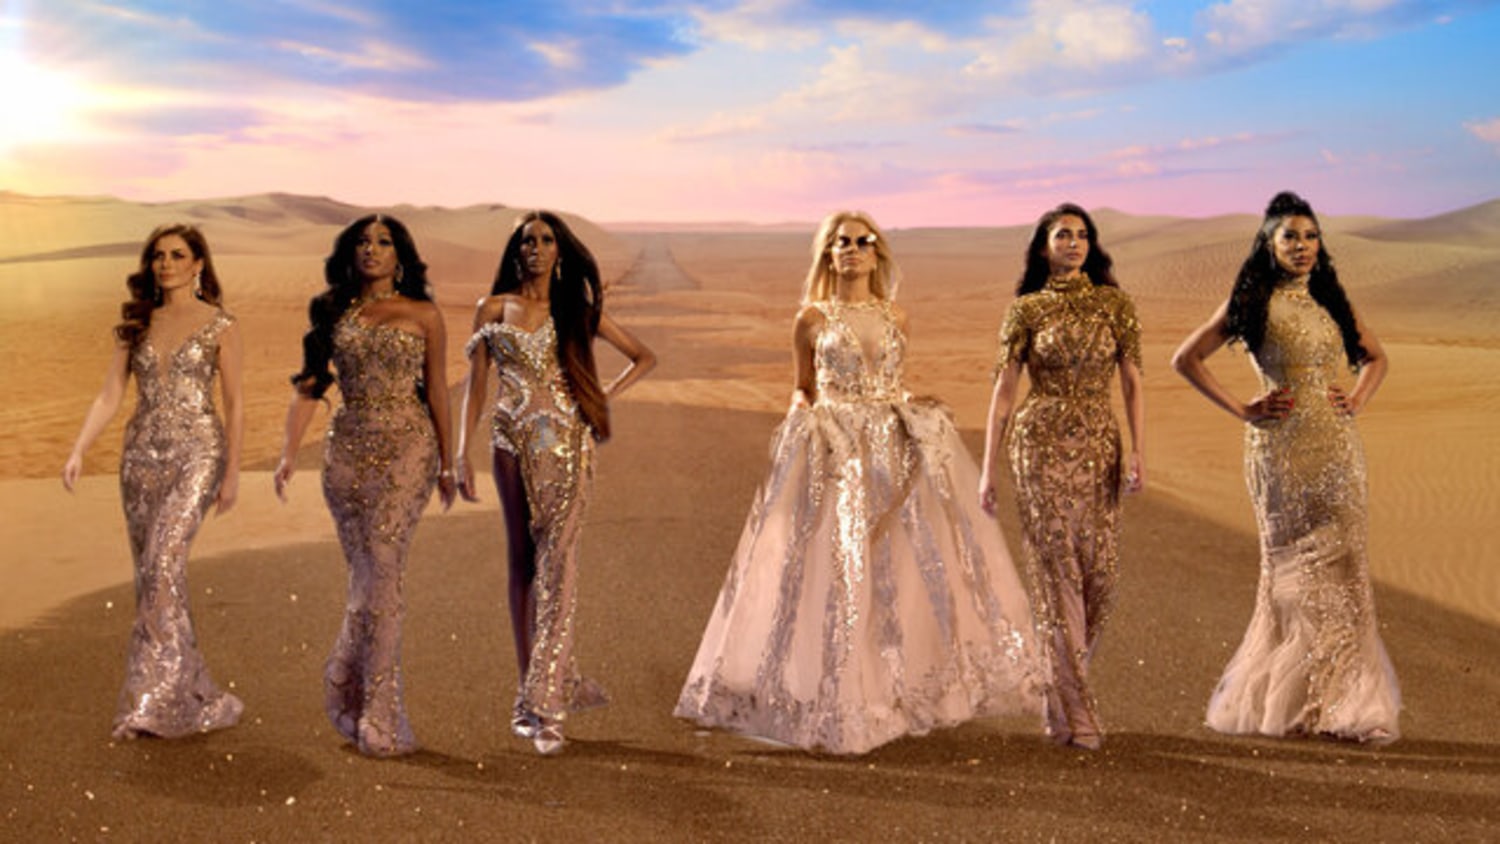 The Real Housewives of Dubai' First-Look Teaser Trailer Released